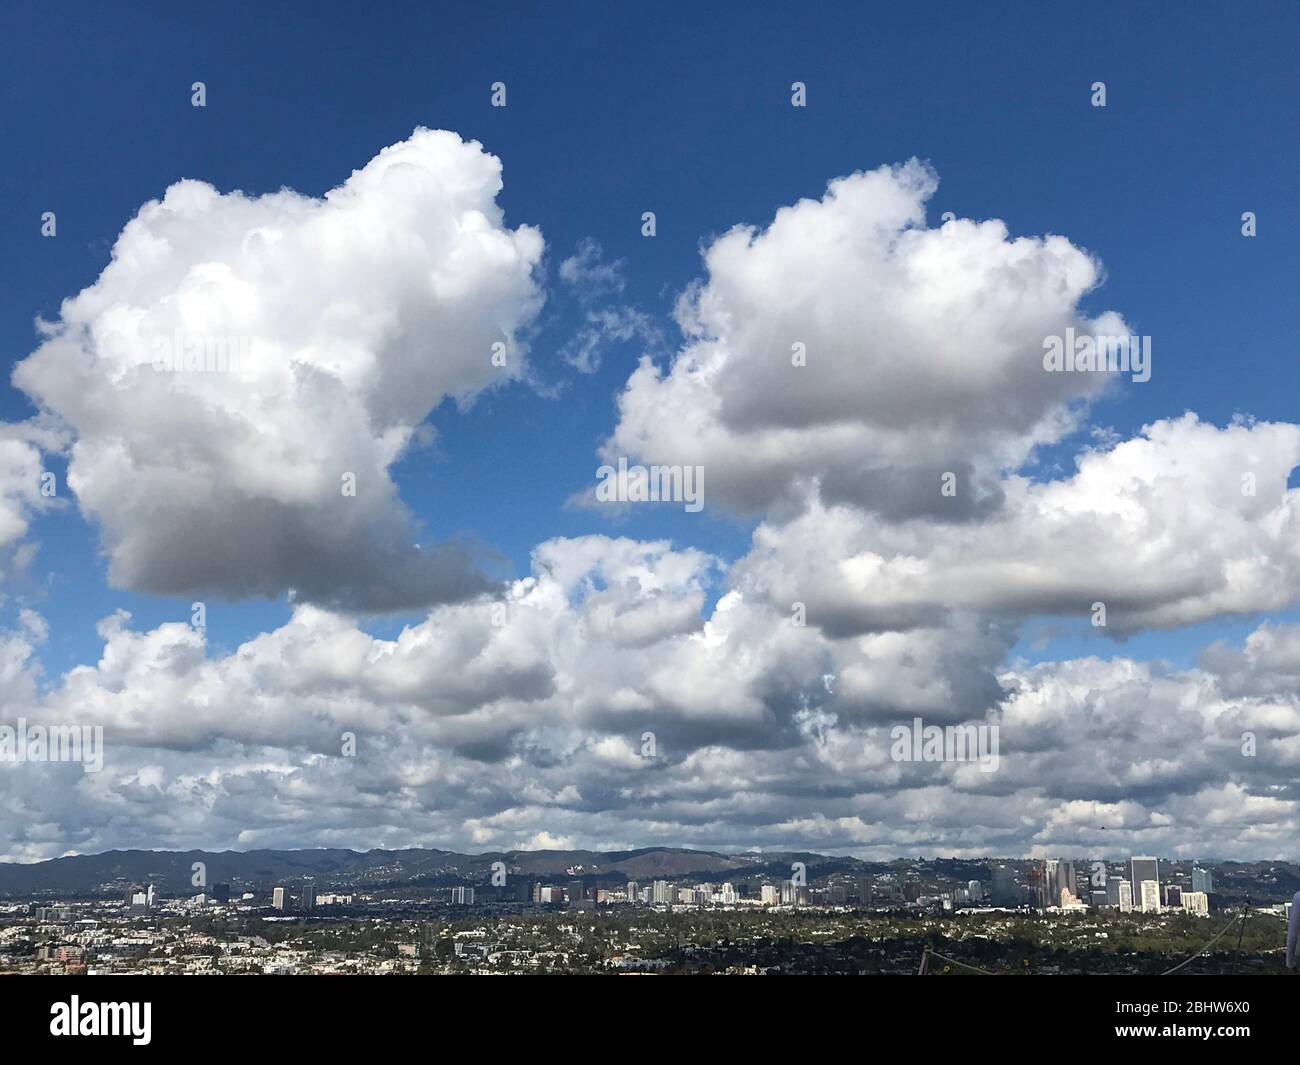 View over L.A. basin from the Baldwin HIlls Scenic Overlook Park with large puffy clouds and clear air , Stock Photo